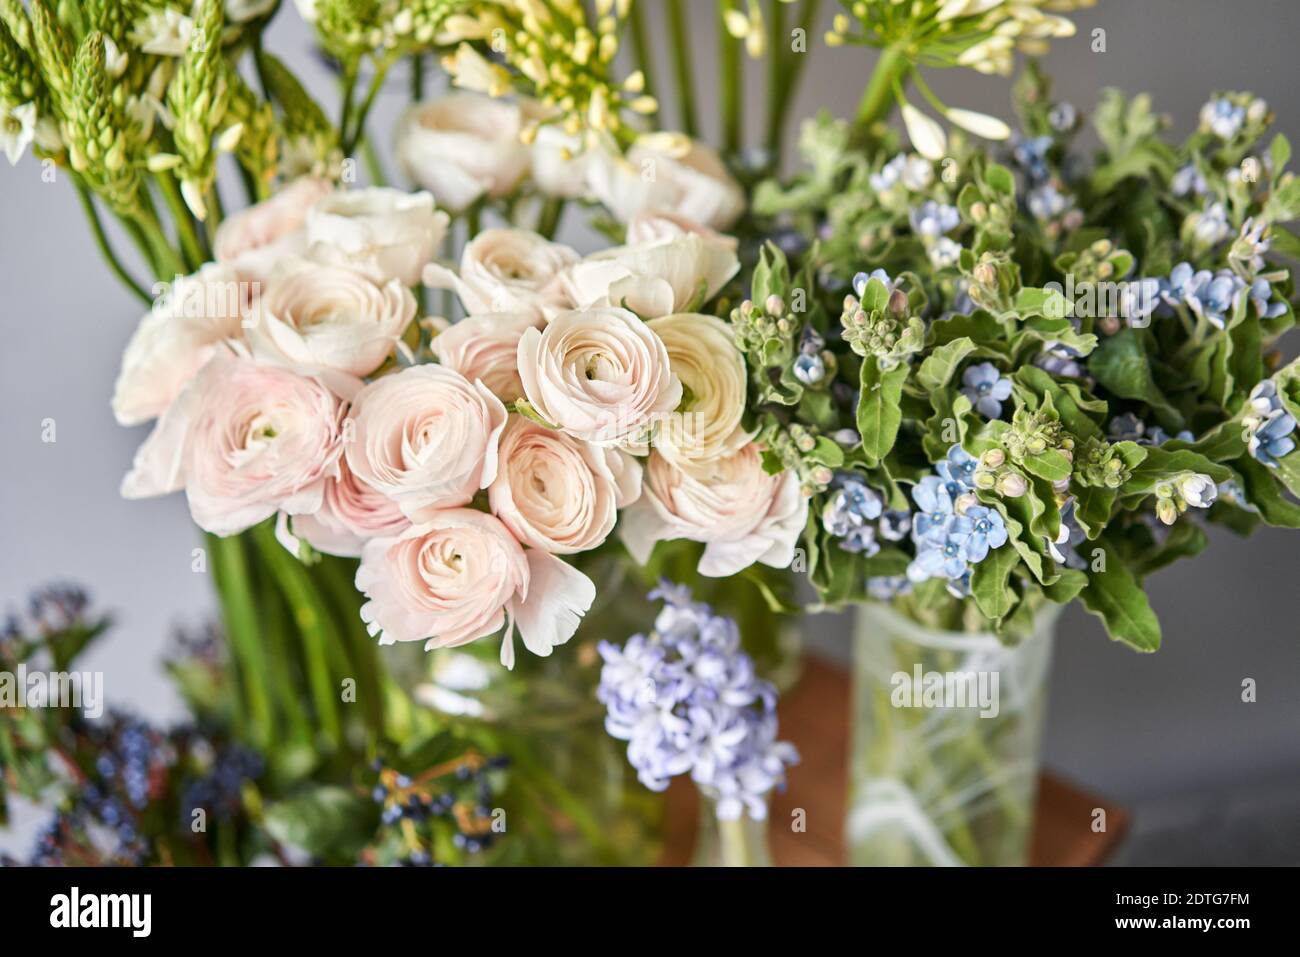 Set of white and blue flowers for Interior decorations. The work of the florist at a flower shop. Fresh cut flower. European floral shop. Delivery Stock Photo